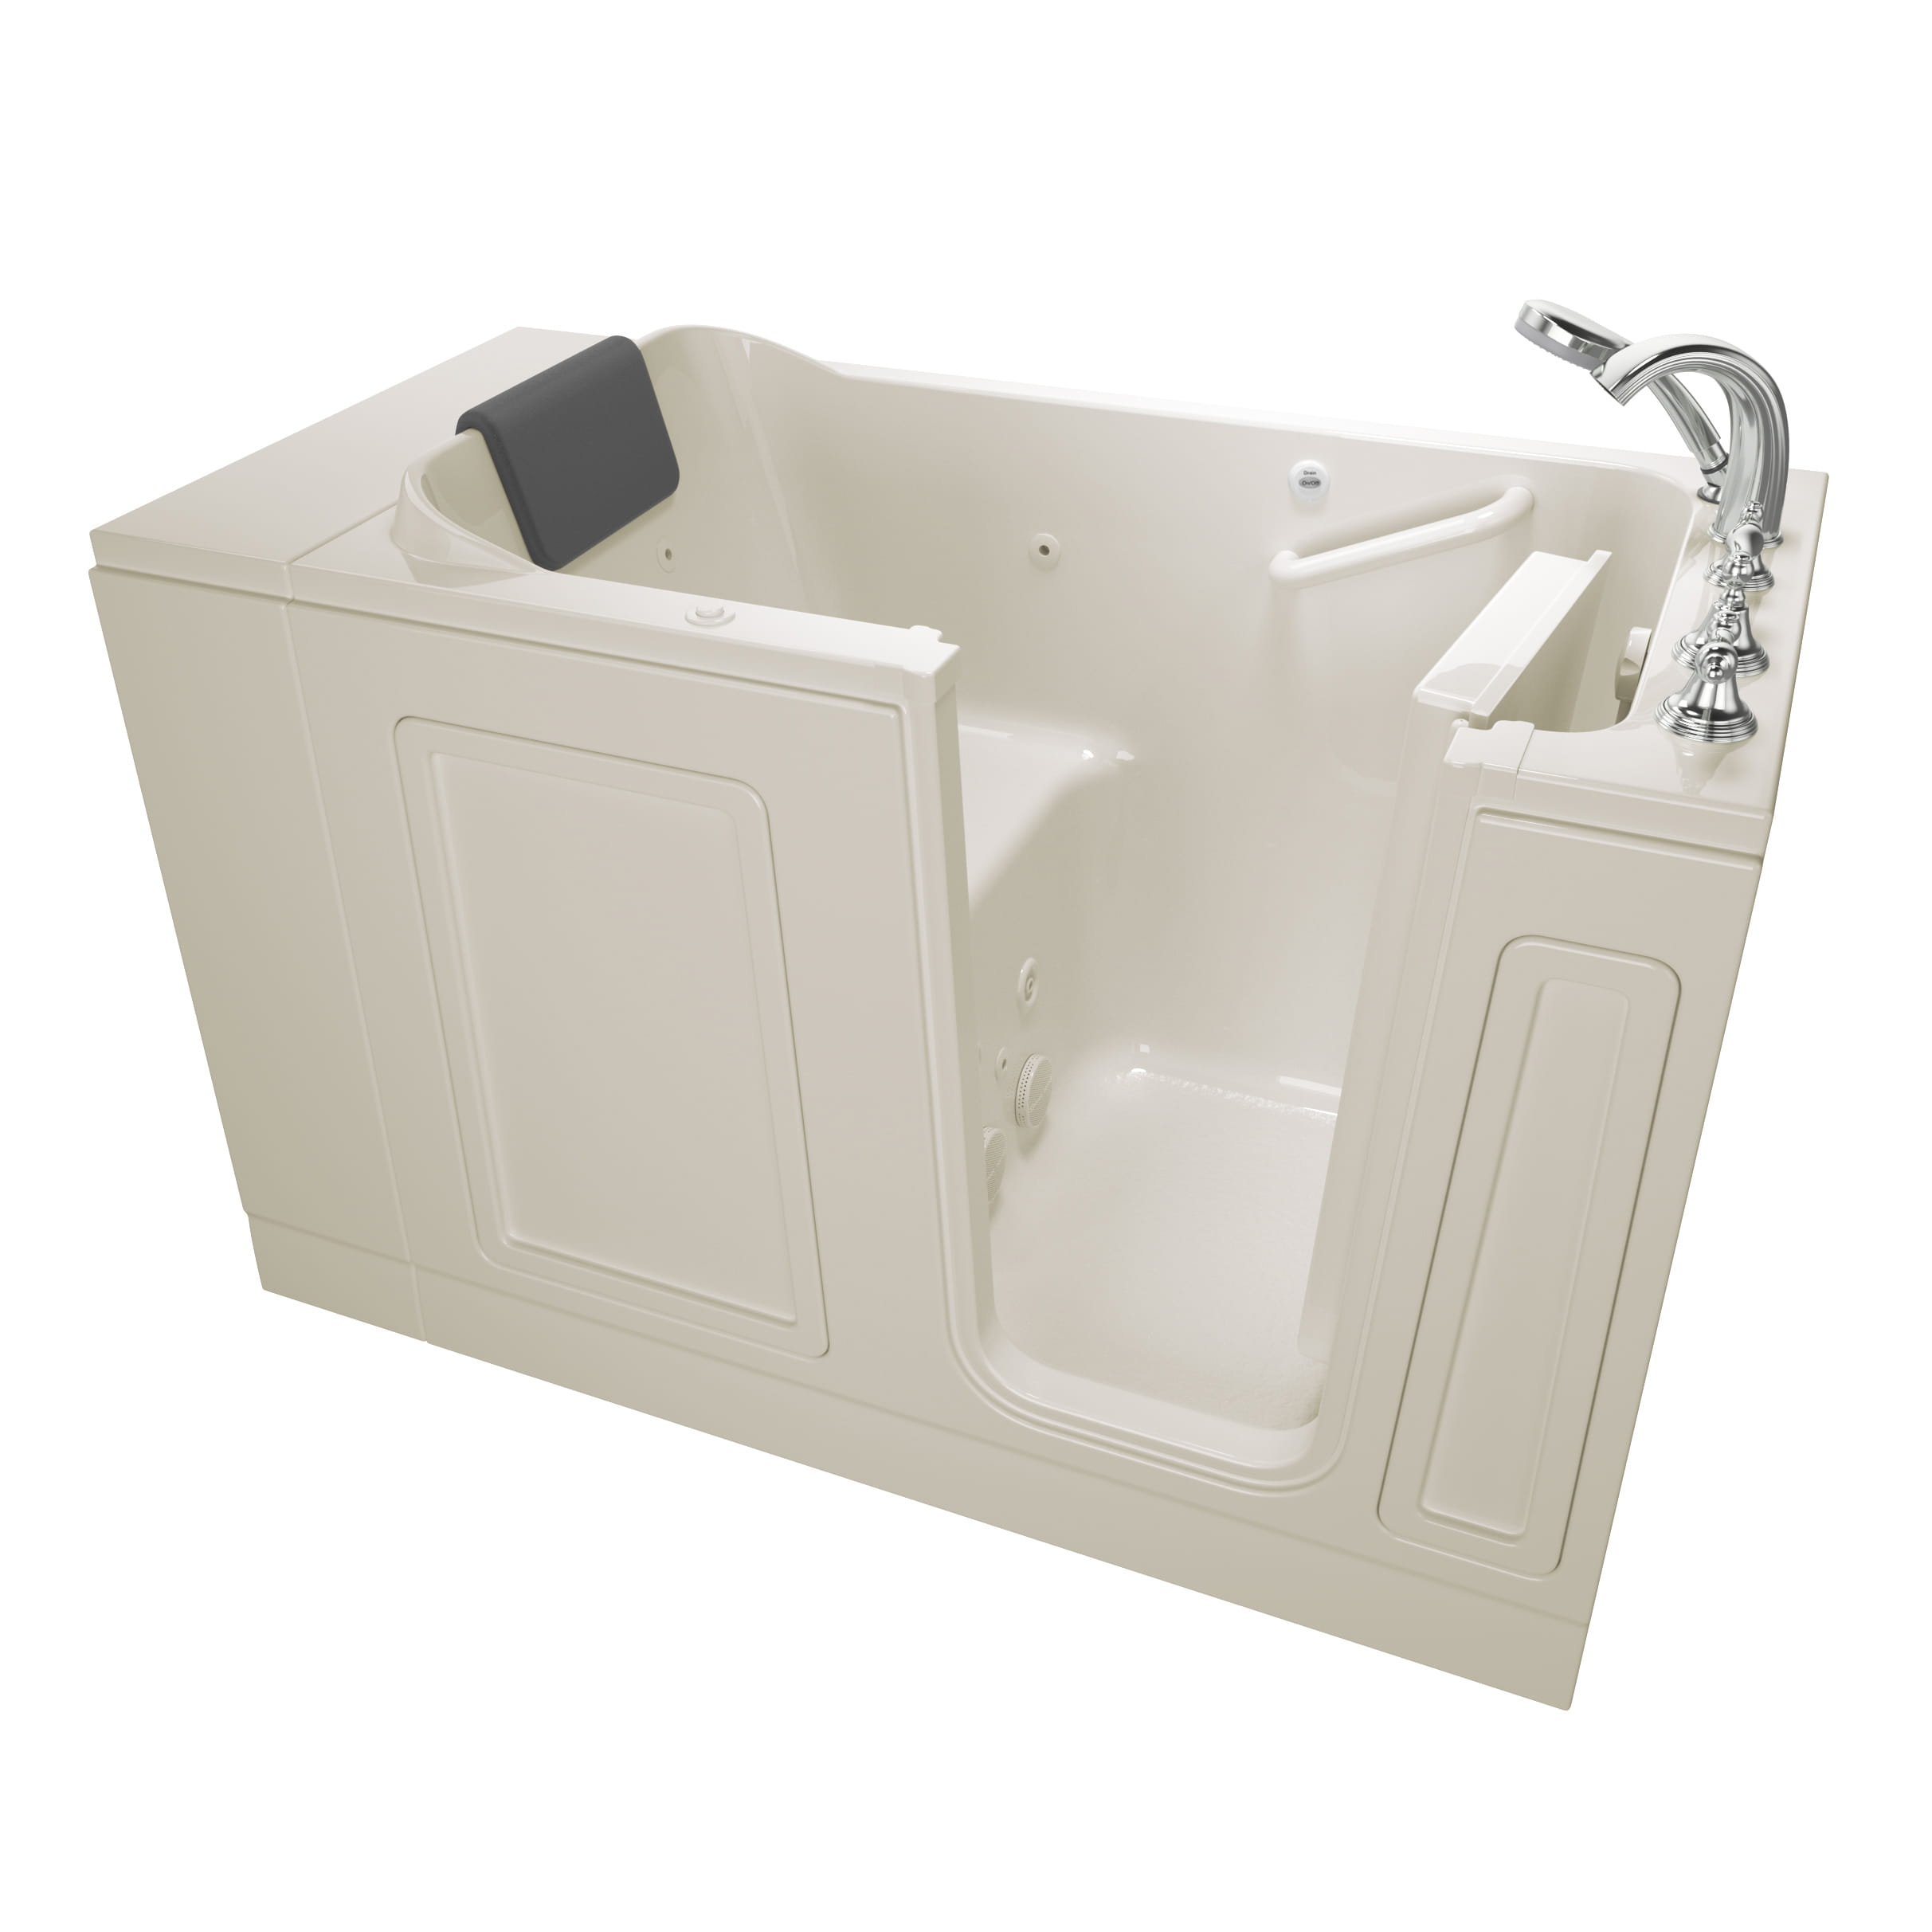 Acrylic Luxury Series 30 x 51 -Inch Walk-in Tub With Whirlpool System - Right-Hand Drain With Faucet